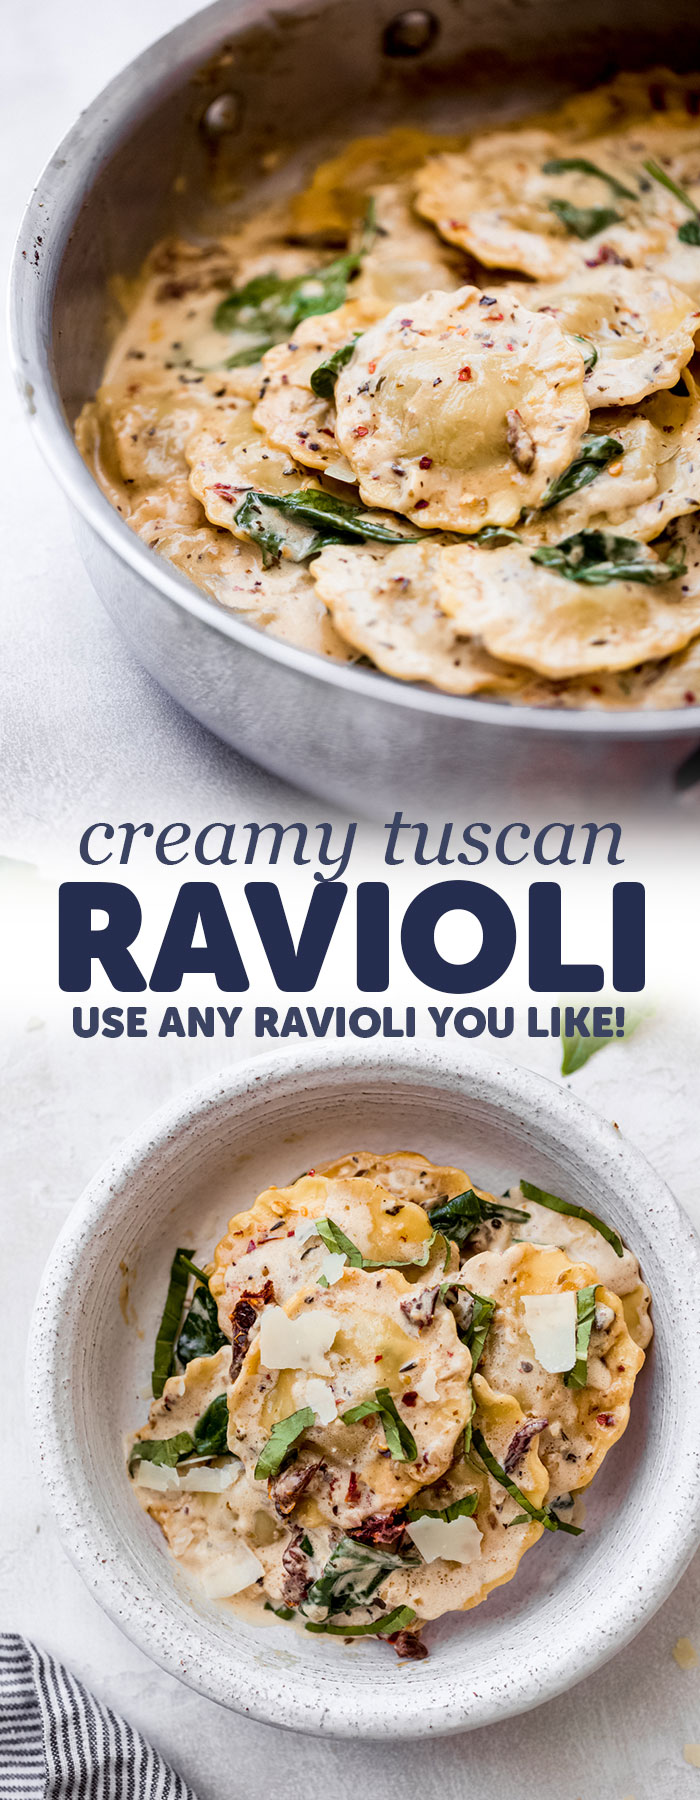 Date Night Creamy Tuscan Ravioli - Your favorite Ravioli pasta tossed in a creamy sun-dried tomato and basil sauce speckled with fresh baby spinach. Great to make on weeknights and ready in less than 30 minutes! #tuscanravioli #tuscancreamsauce #ravioli #pastadinner #easydinnerecipes | Littlespicejar.com